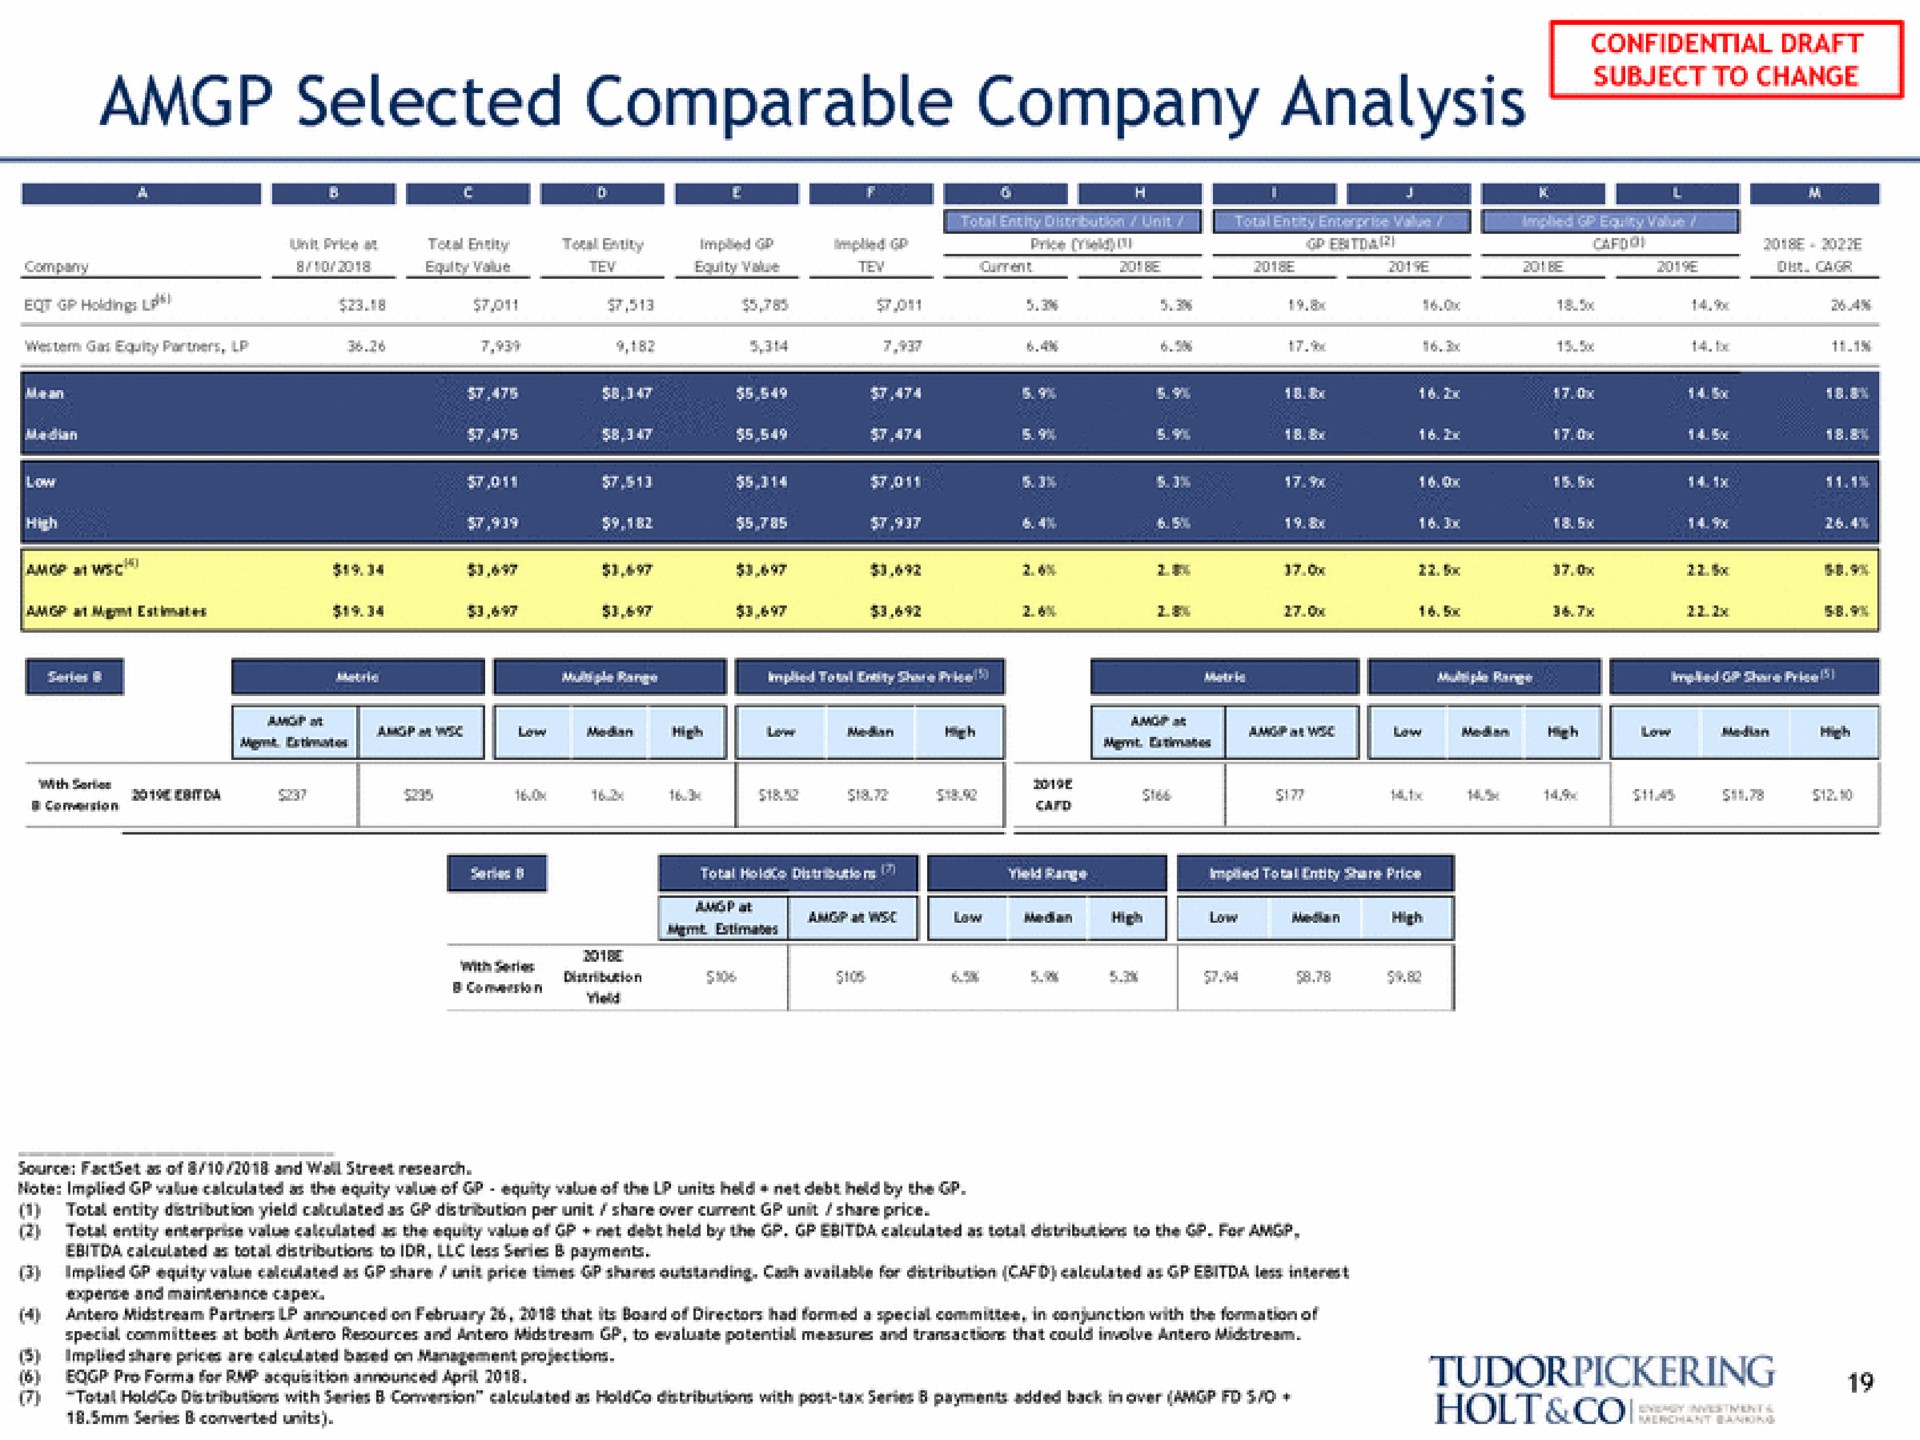 selected comparable company analysis a reel | Tudor, Pickering, Holt & Co